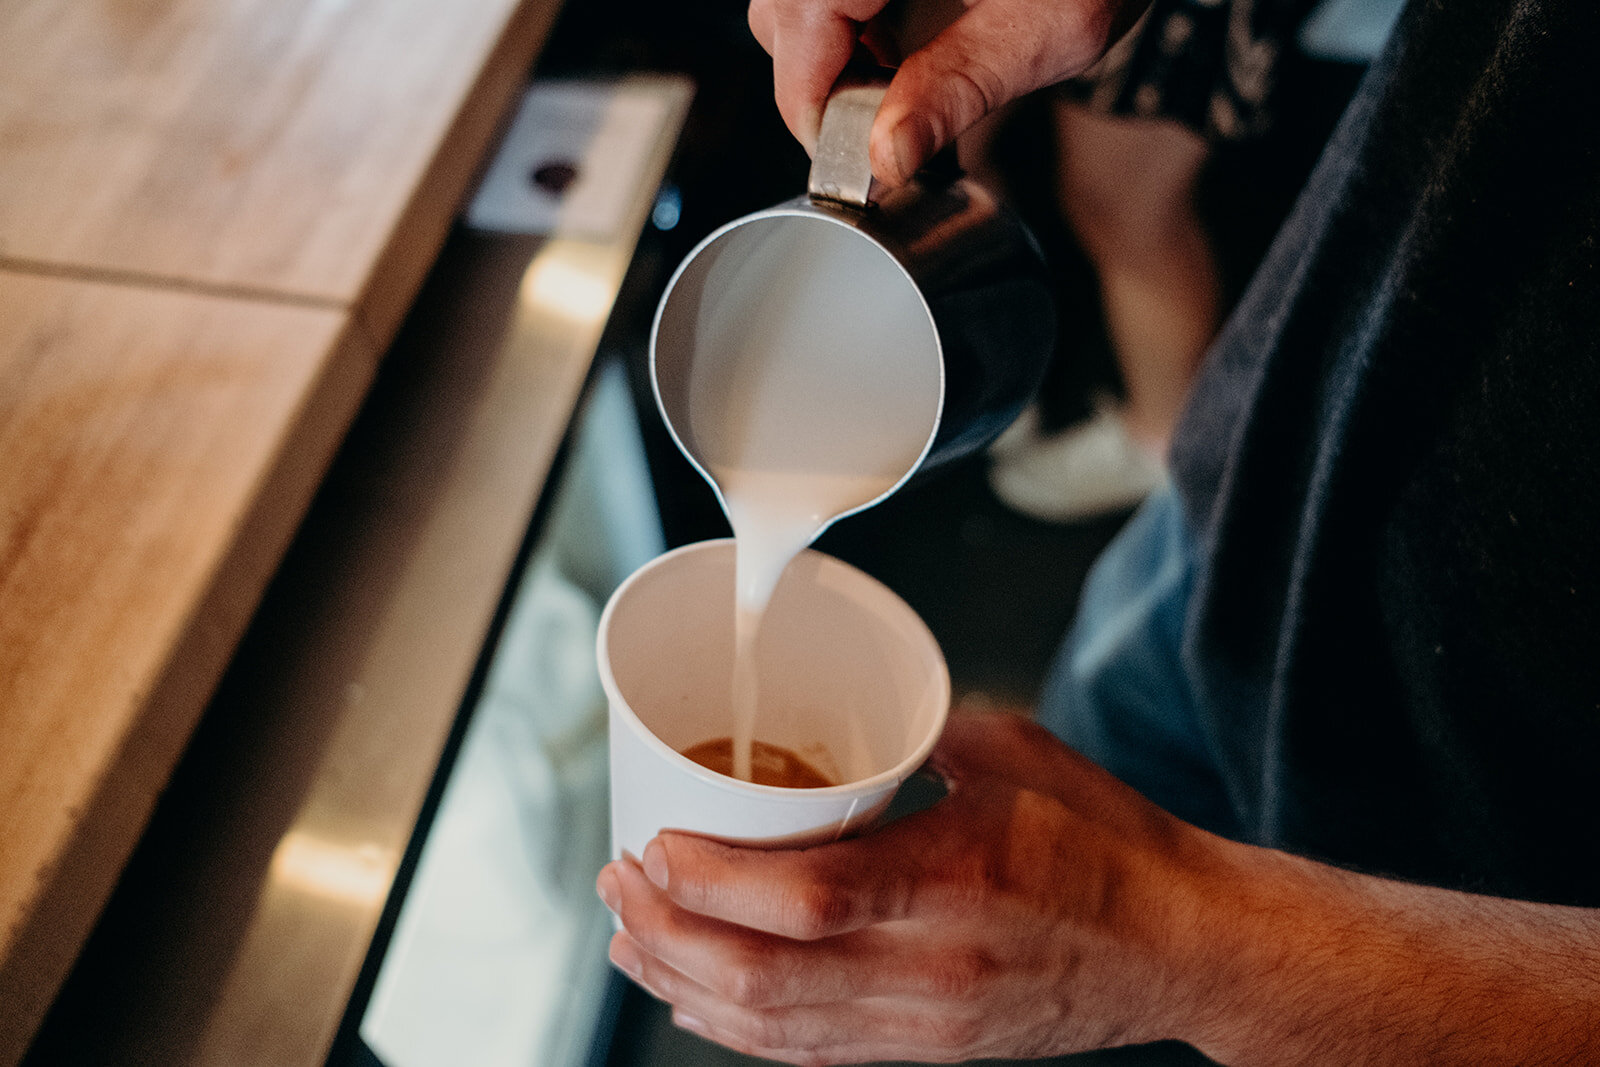 A barista at King Street Coffee in Leesburg, VA pours the oat milk into the drink he is making for the bride on her wedding day. 